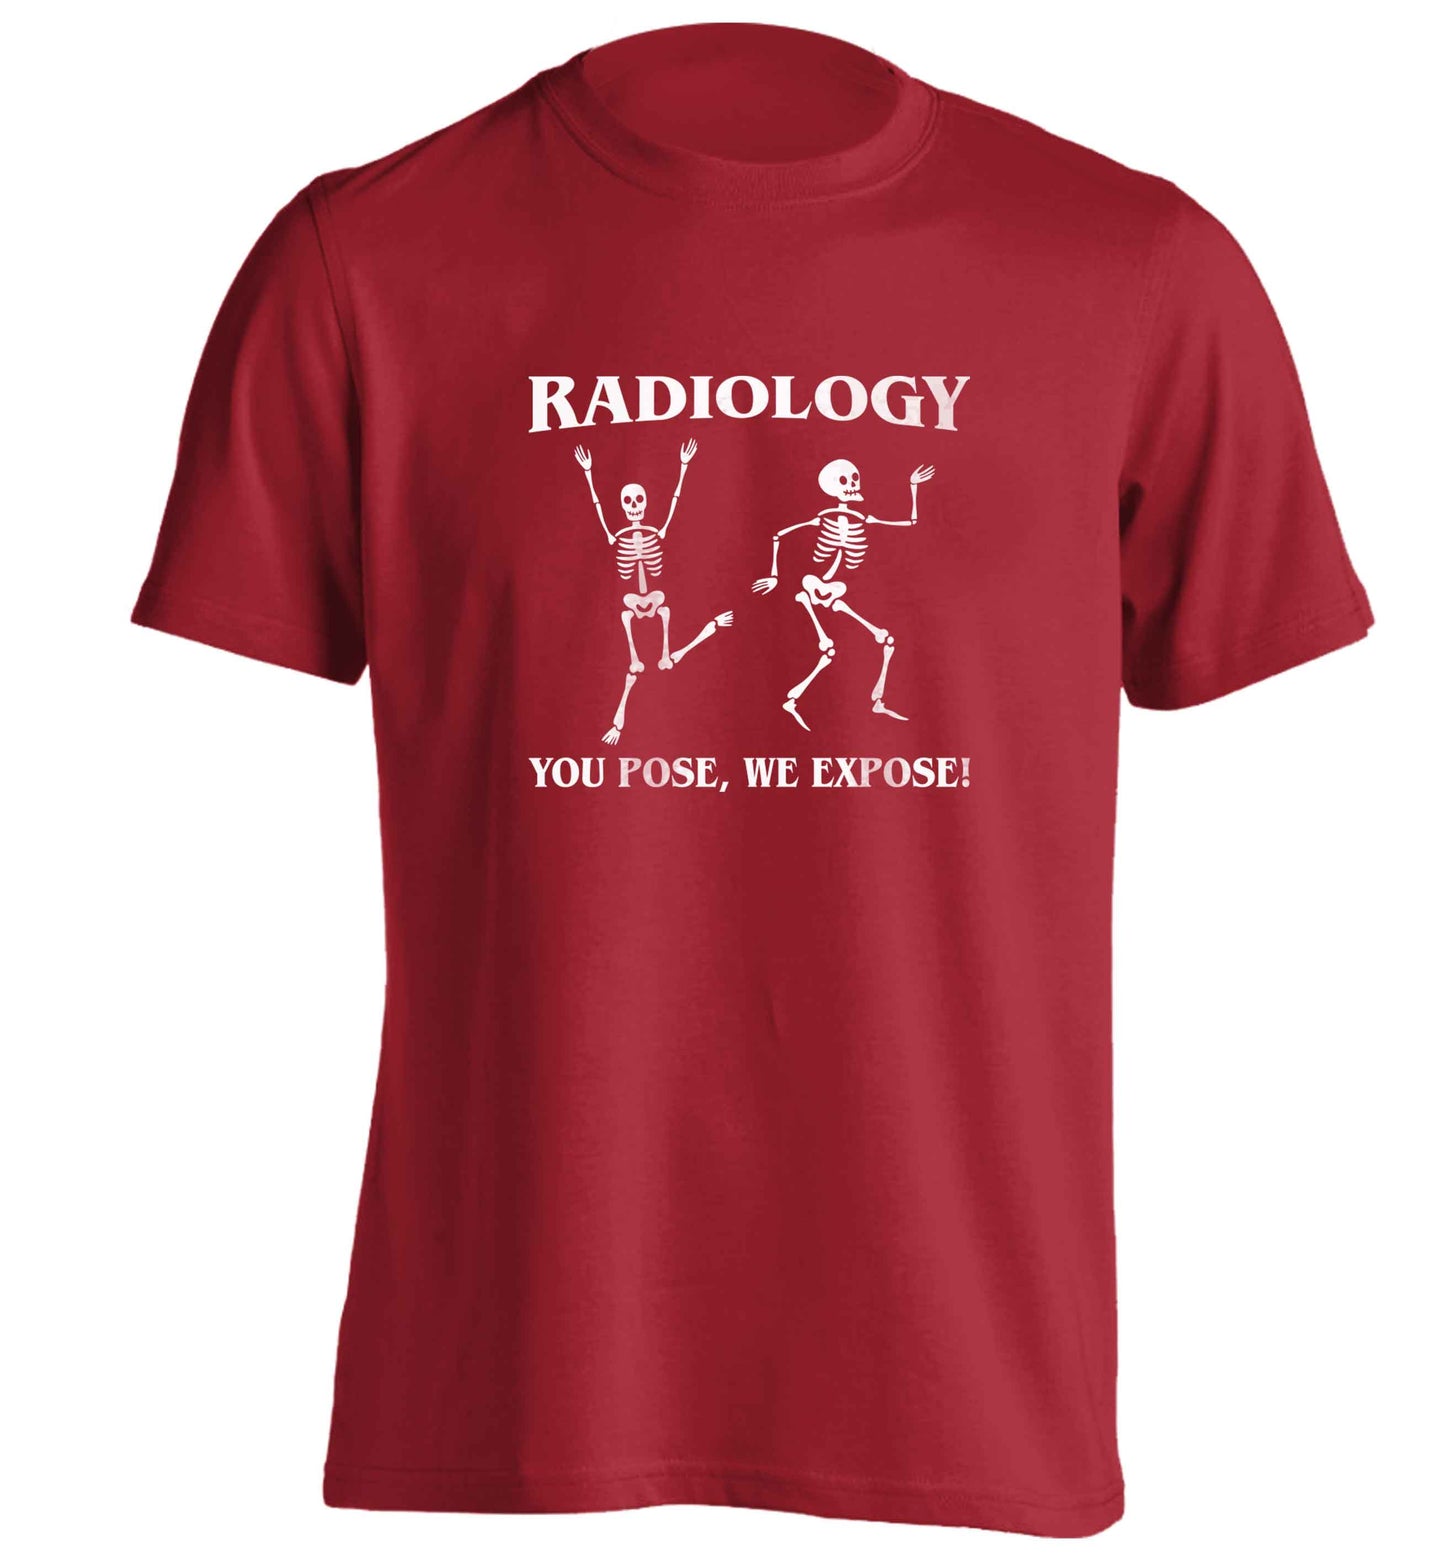 Radiology you pose we expose adults unisex red Tshirt 2XL